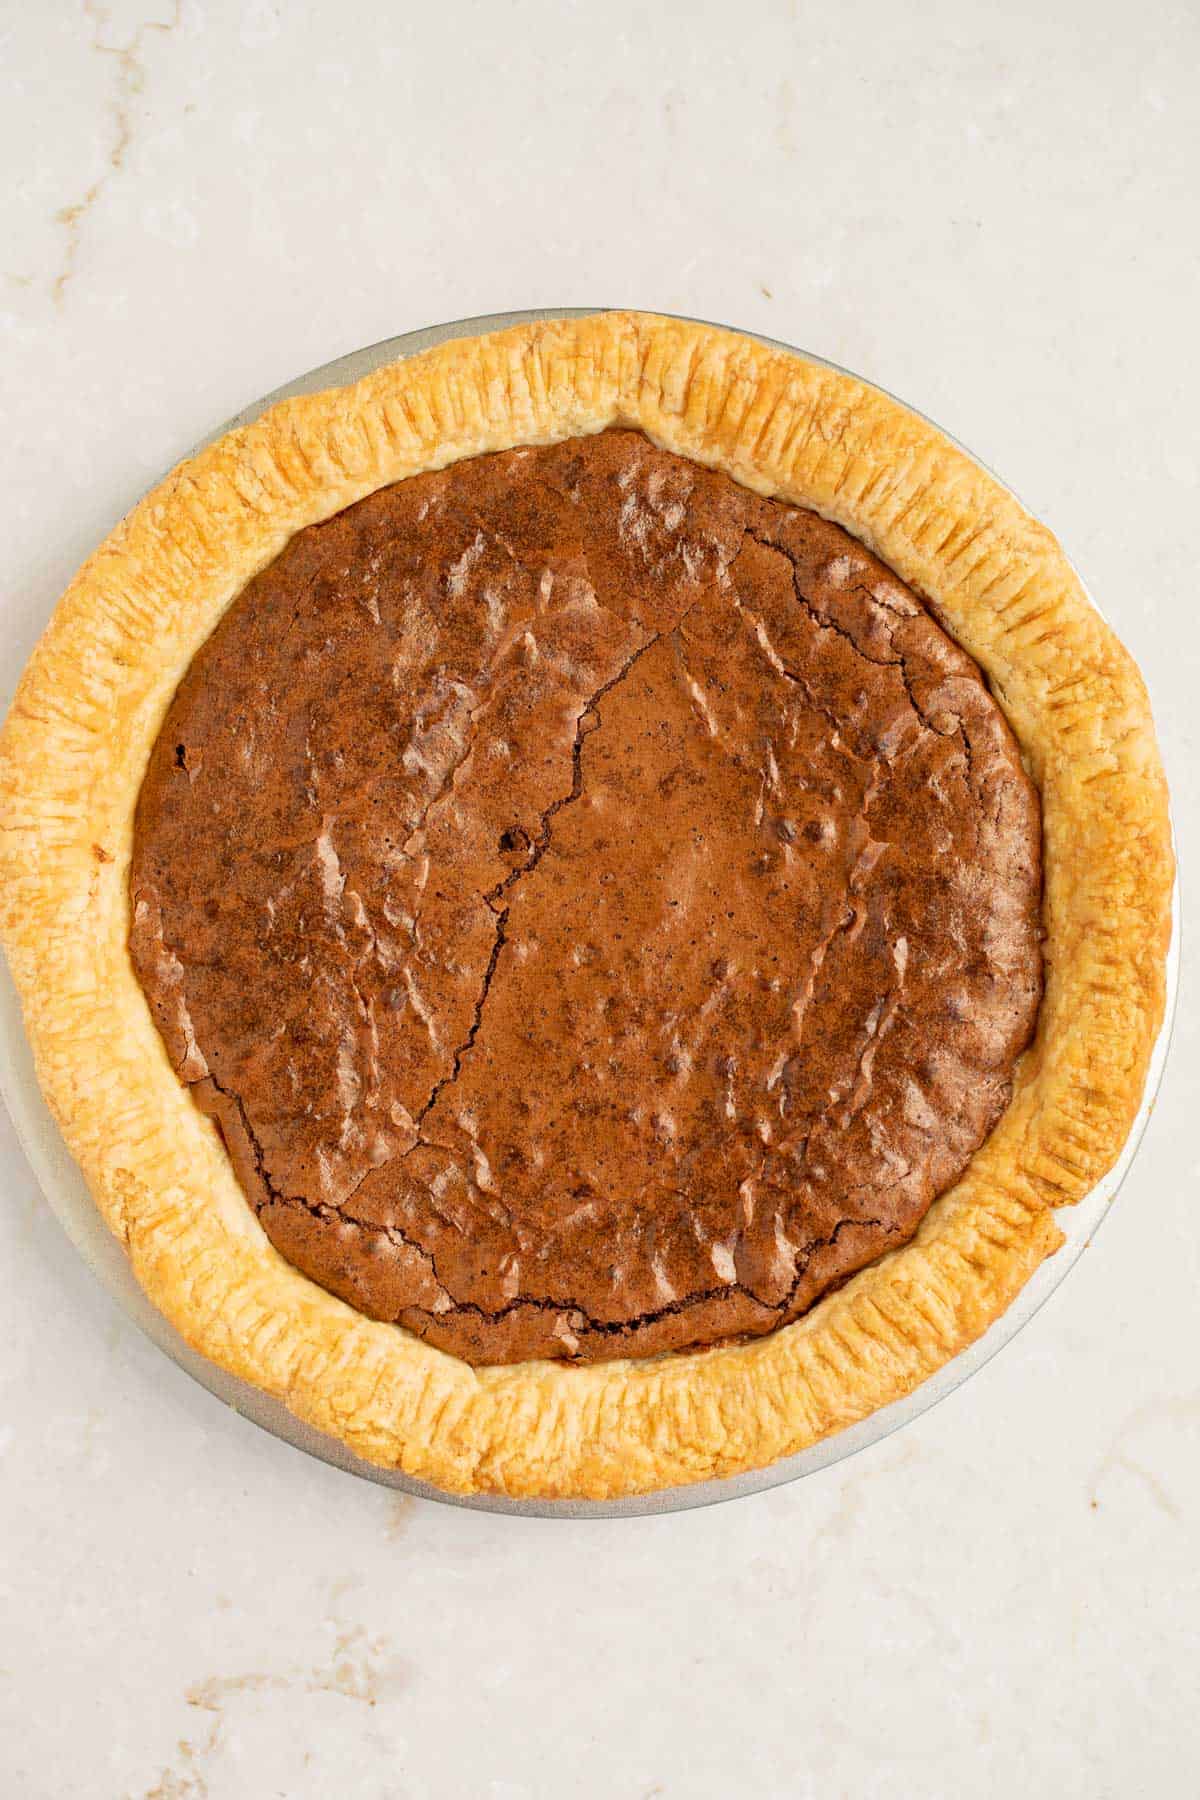 brownies baked into pie crust on a white background.